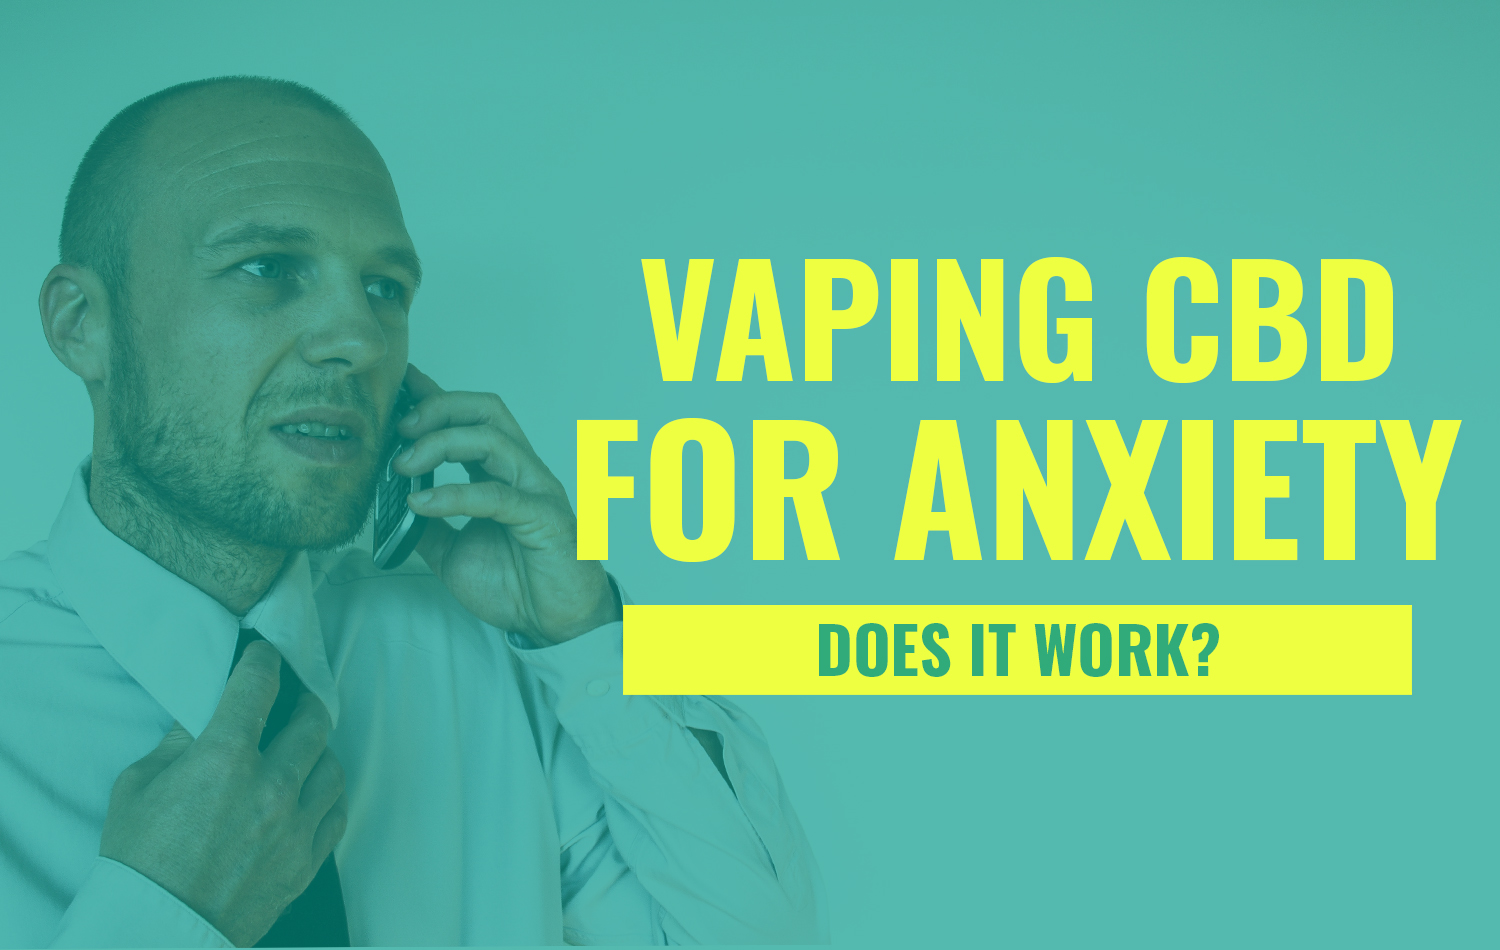 Vaping CBD for anxiety - does it work? blog post